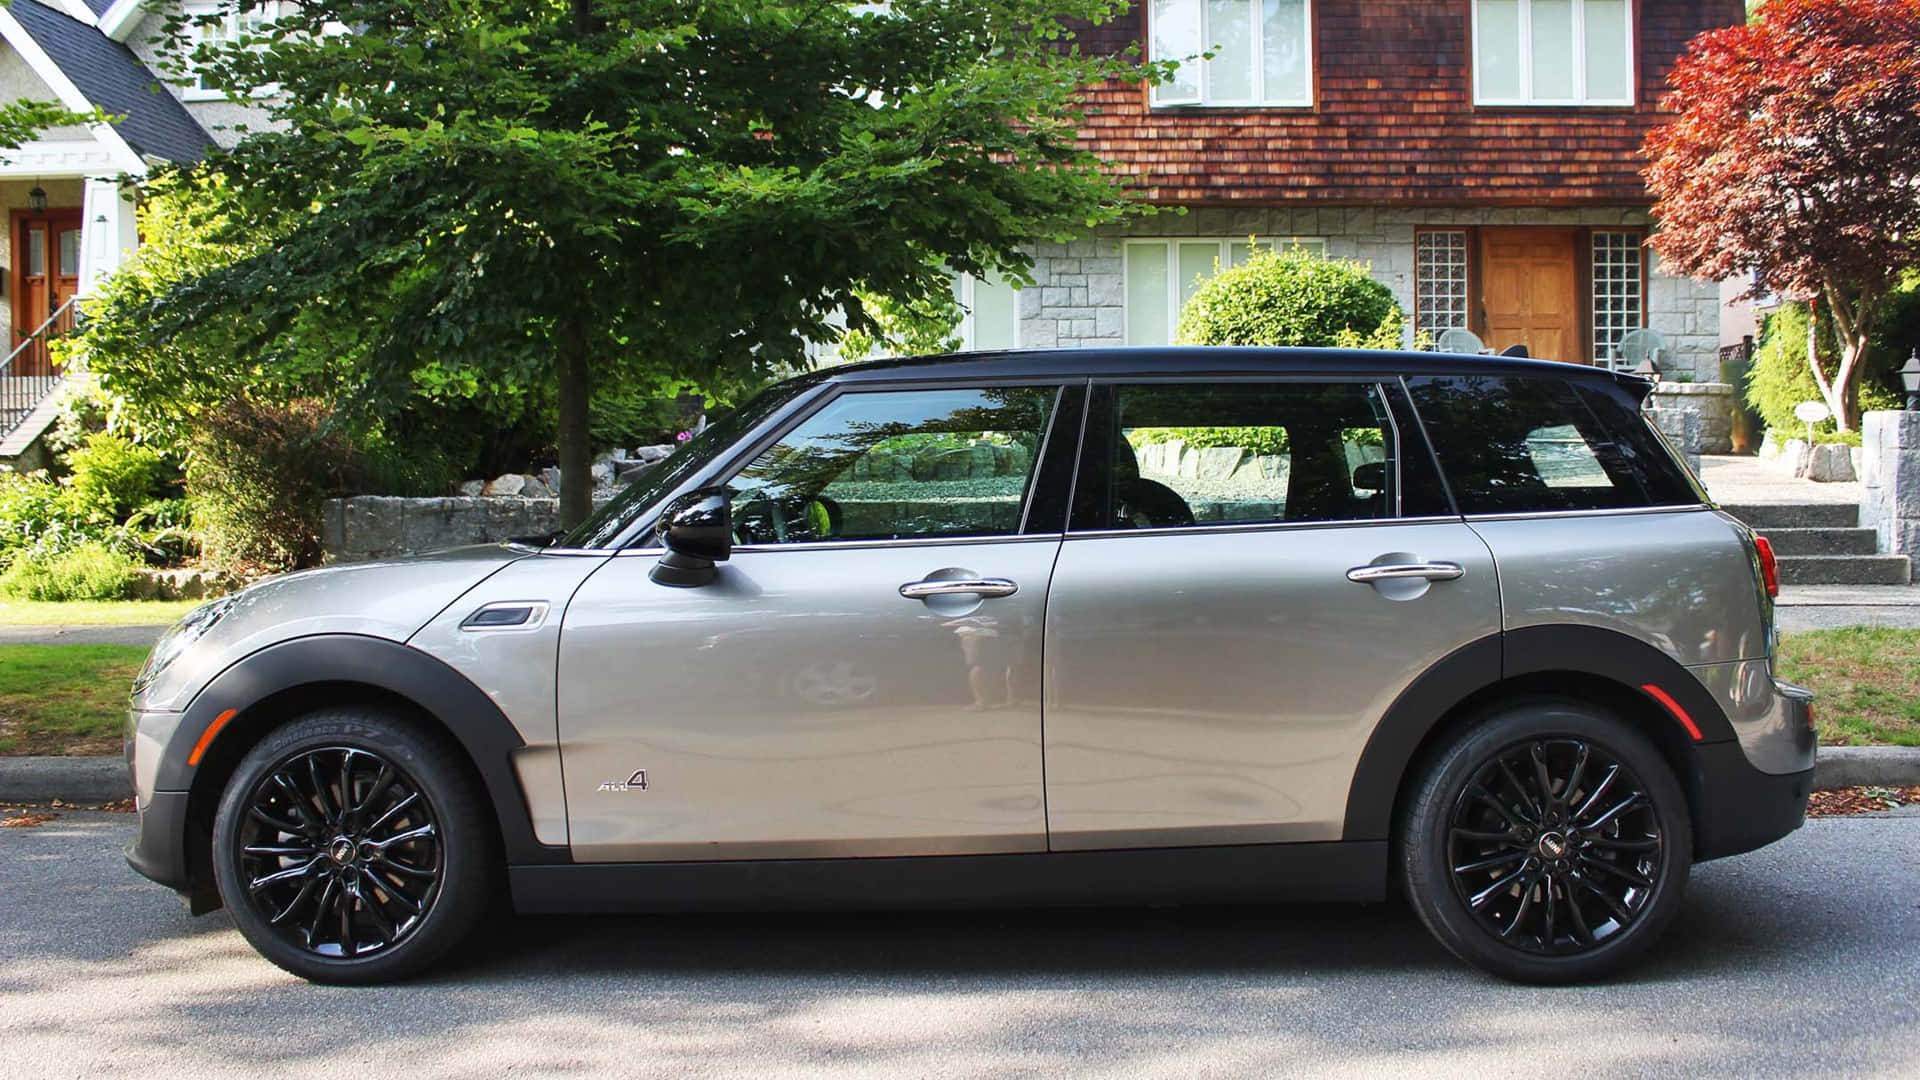 Stunning Mini Cooper S Clubman All4 on the road Wallpaper